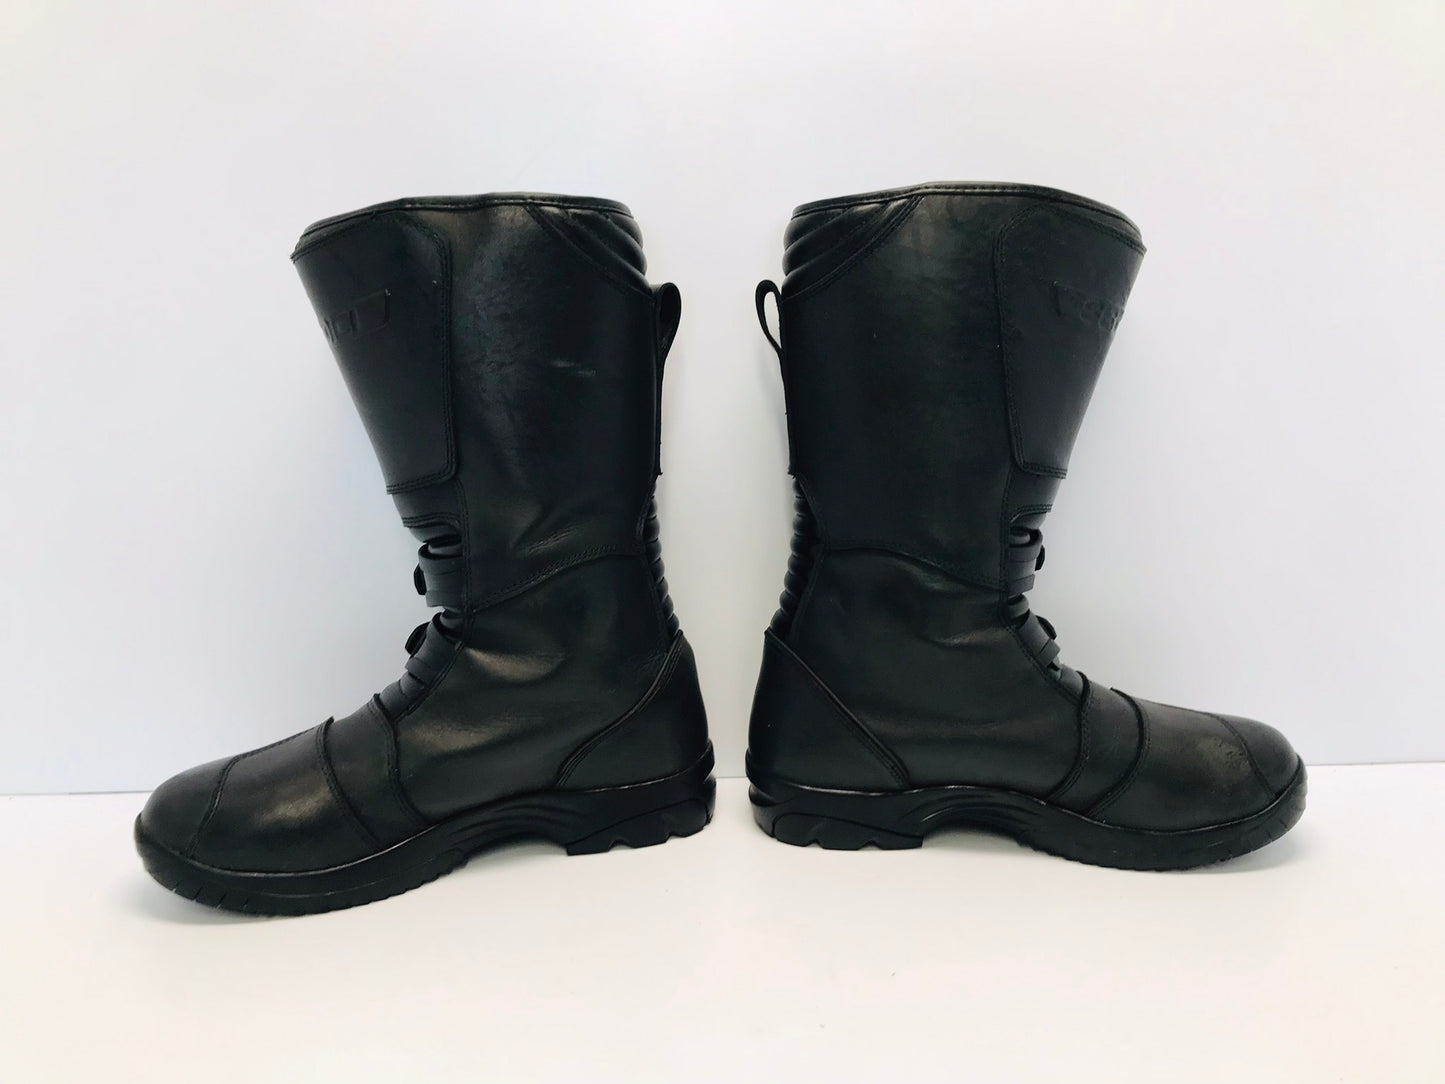 Motorcycle Motocross Men's Leather Safety Boots Size 11 Worn Once Like New